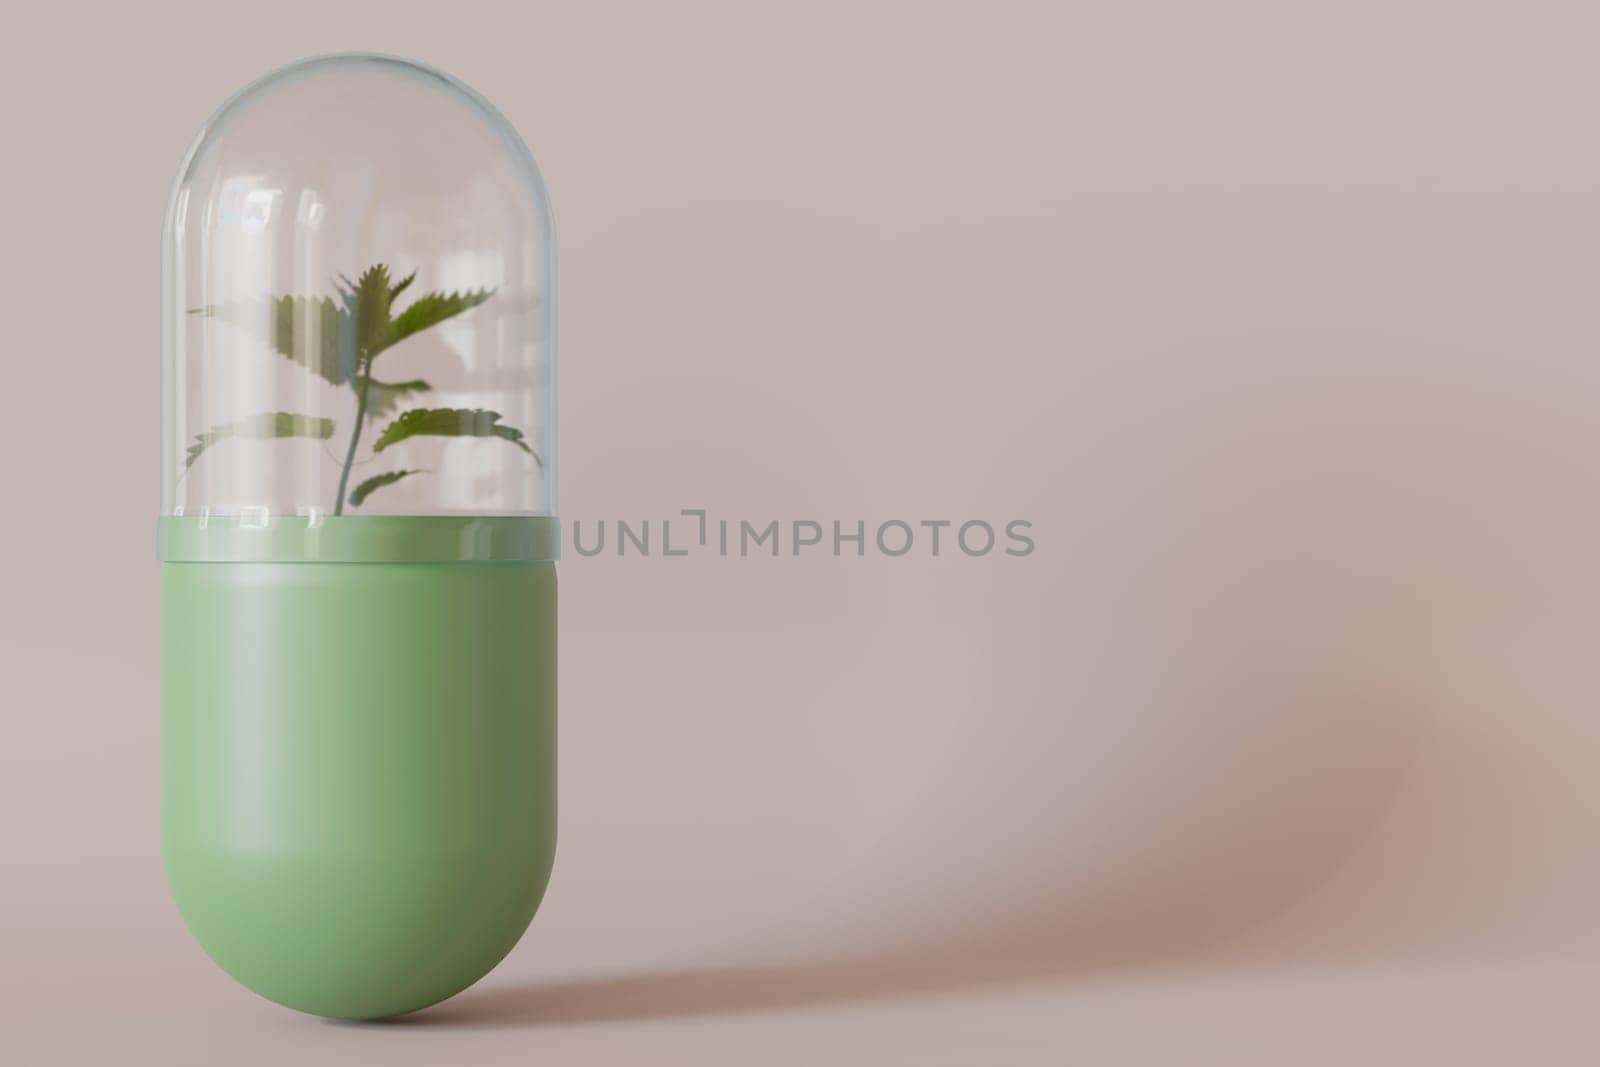 Elegant homeopathy capsule with a plant inside, conveying natural and alternative medicine concepts, ideal for wellness and healthcare imagery. Homeopathic therapy. Copy space for text. 3D rendering